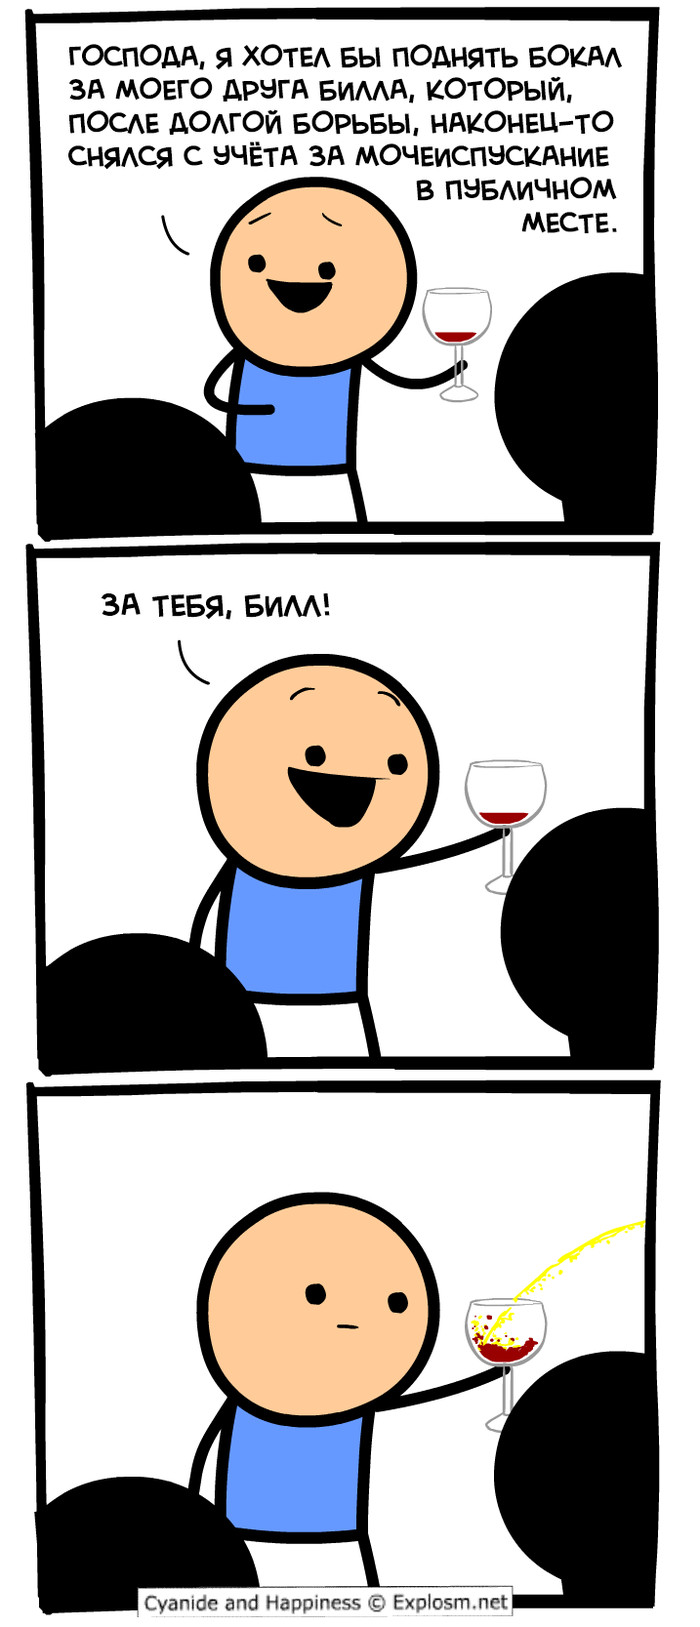   , Cyanide and Happiness, , , , , 